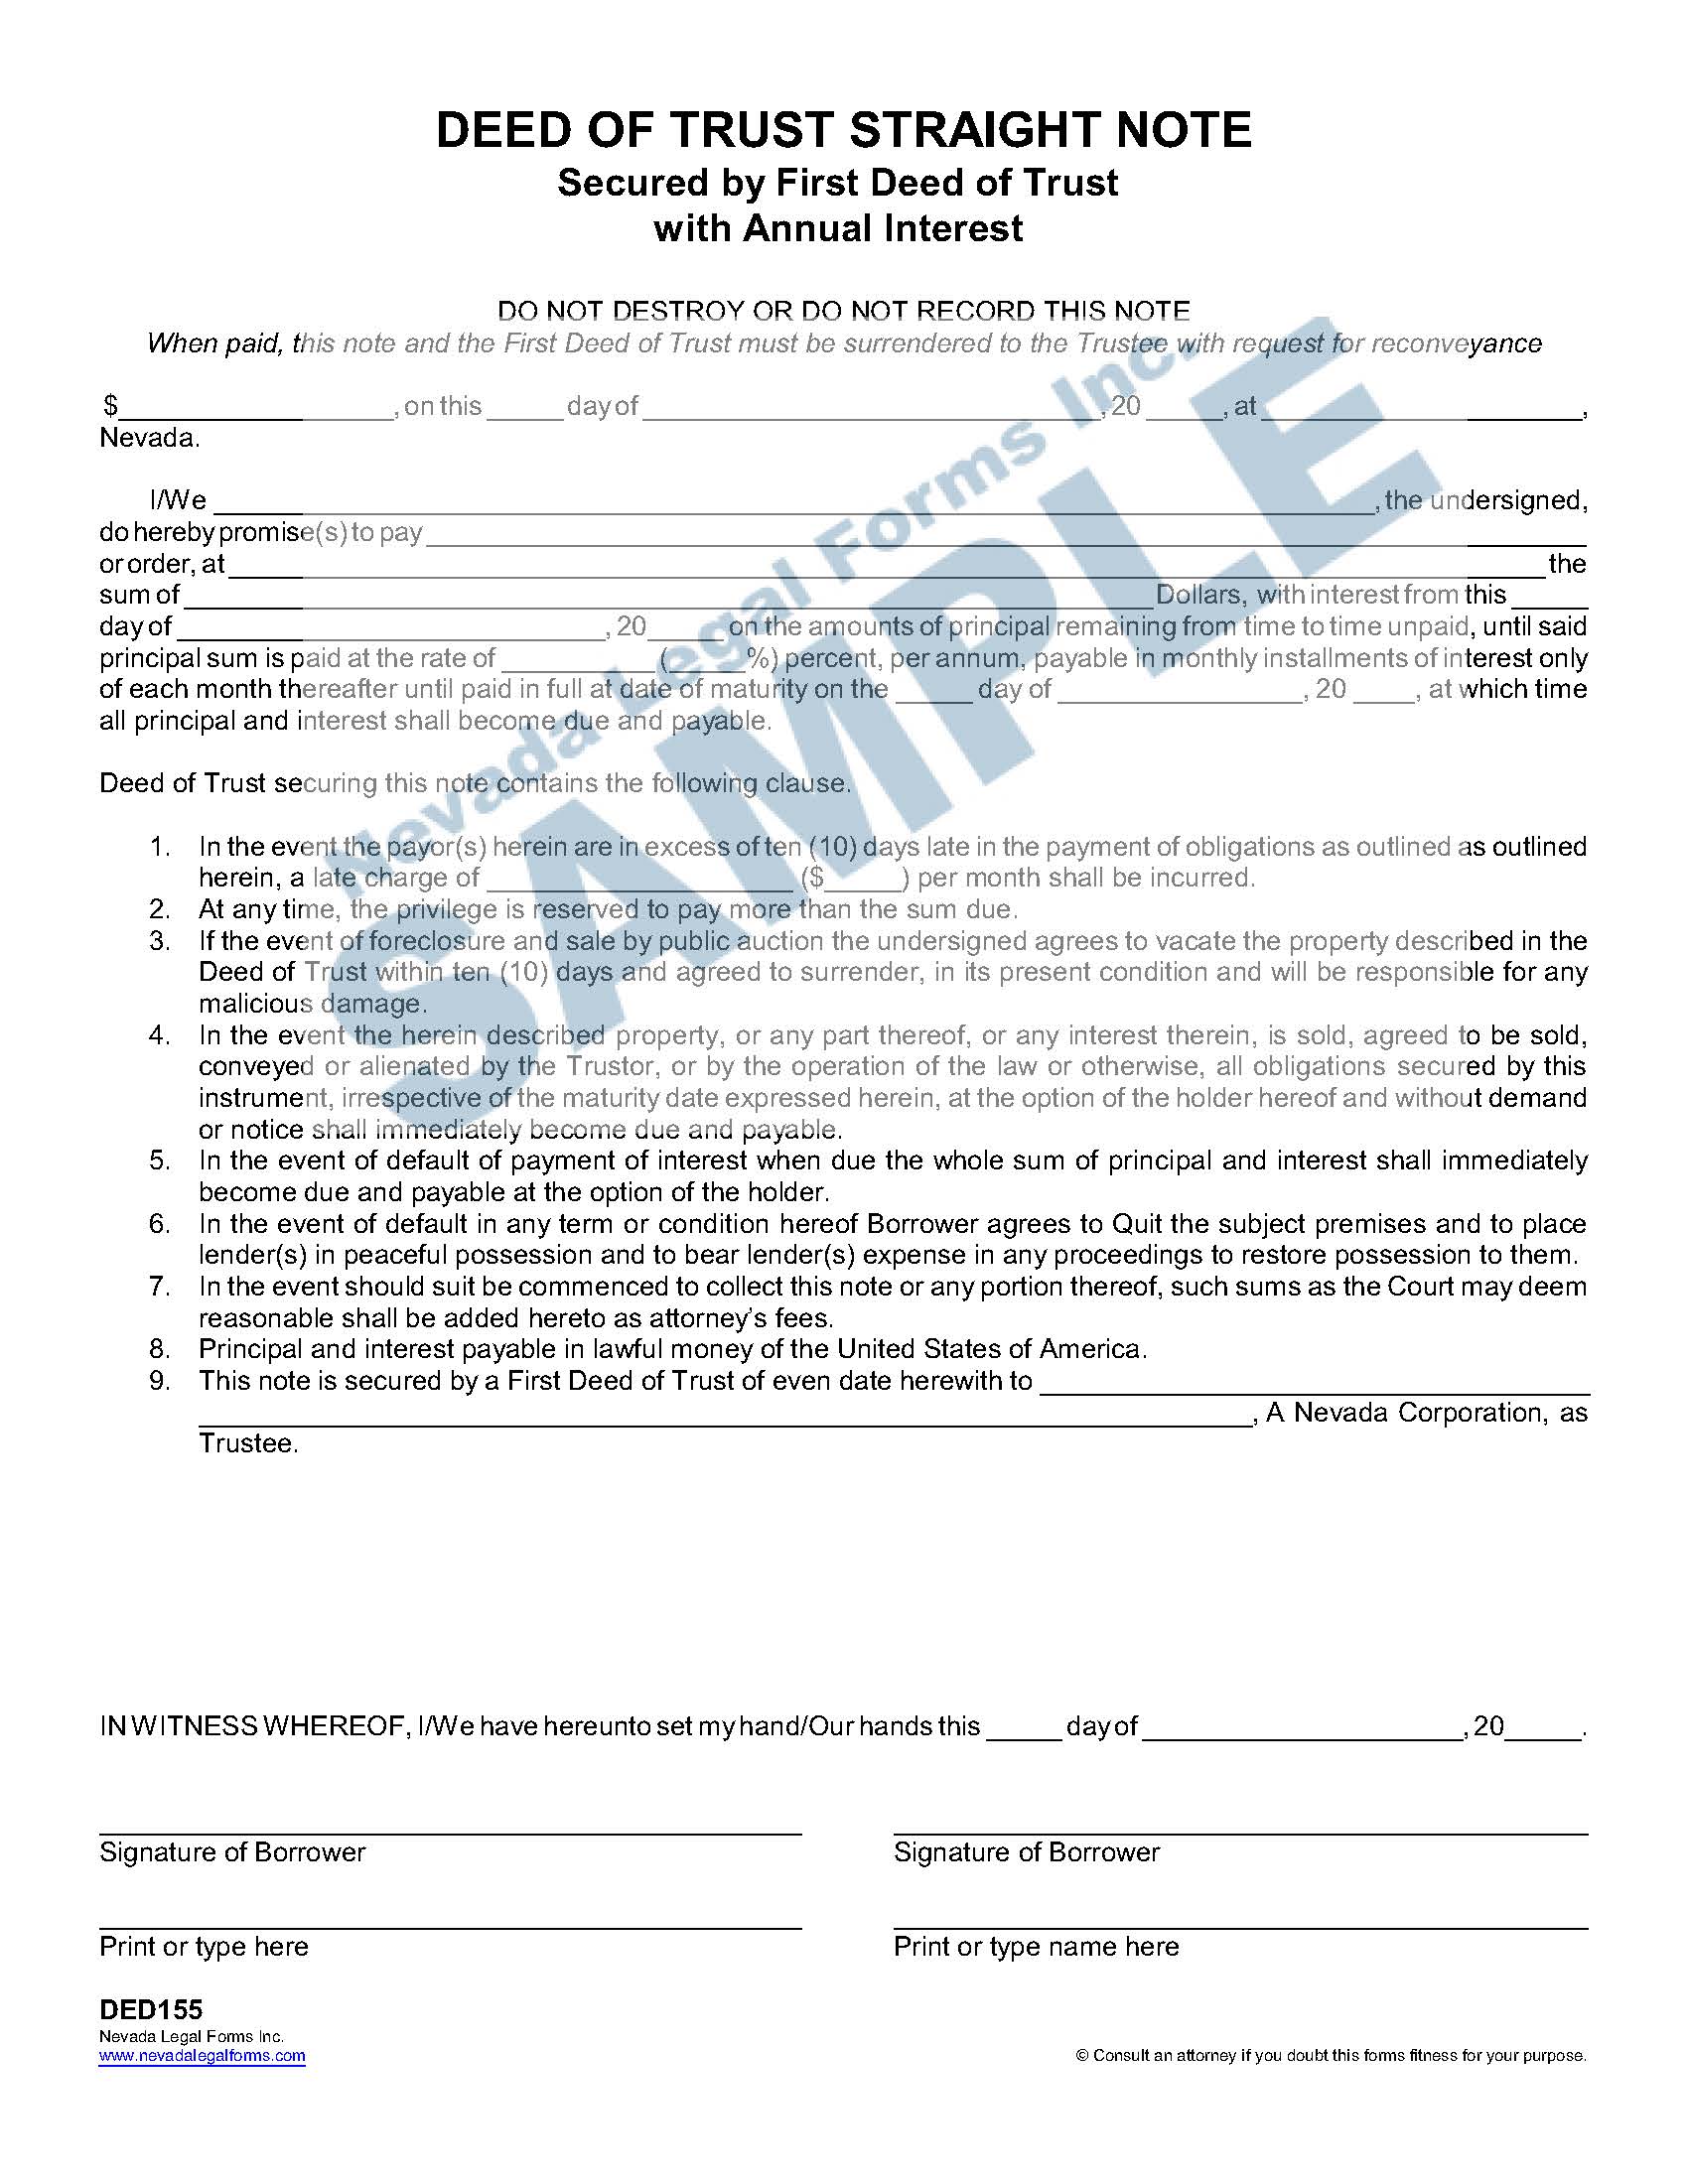 DEED OF STRAIGHT NOTE Nevada Legal Forms Services